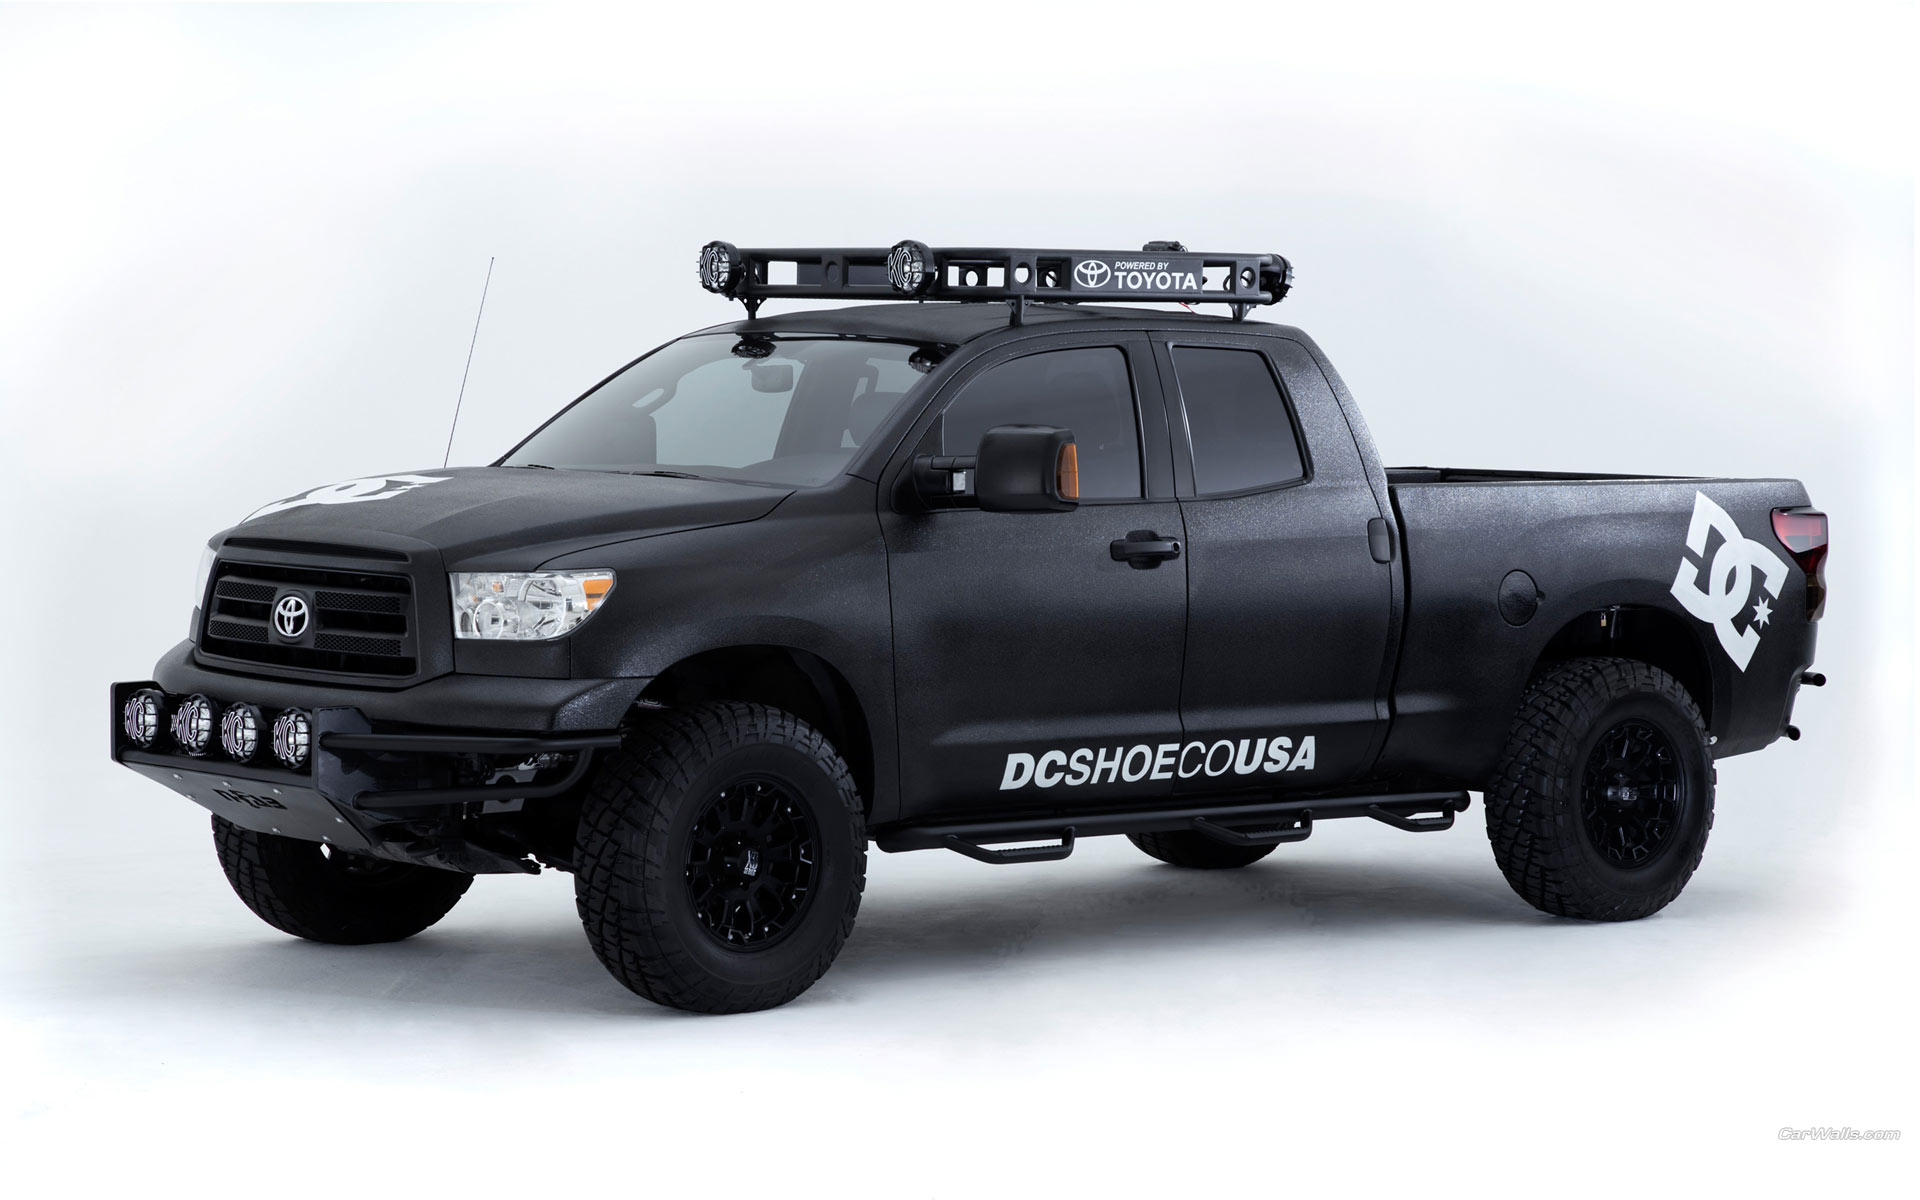 Toyota Tundra Wallpaper 5810 Hd Wallpapers | Cars Background ...